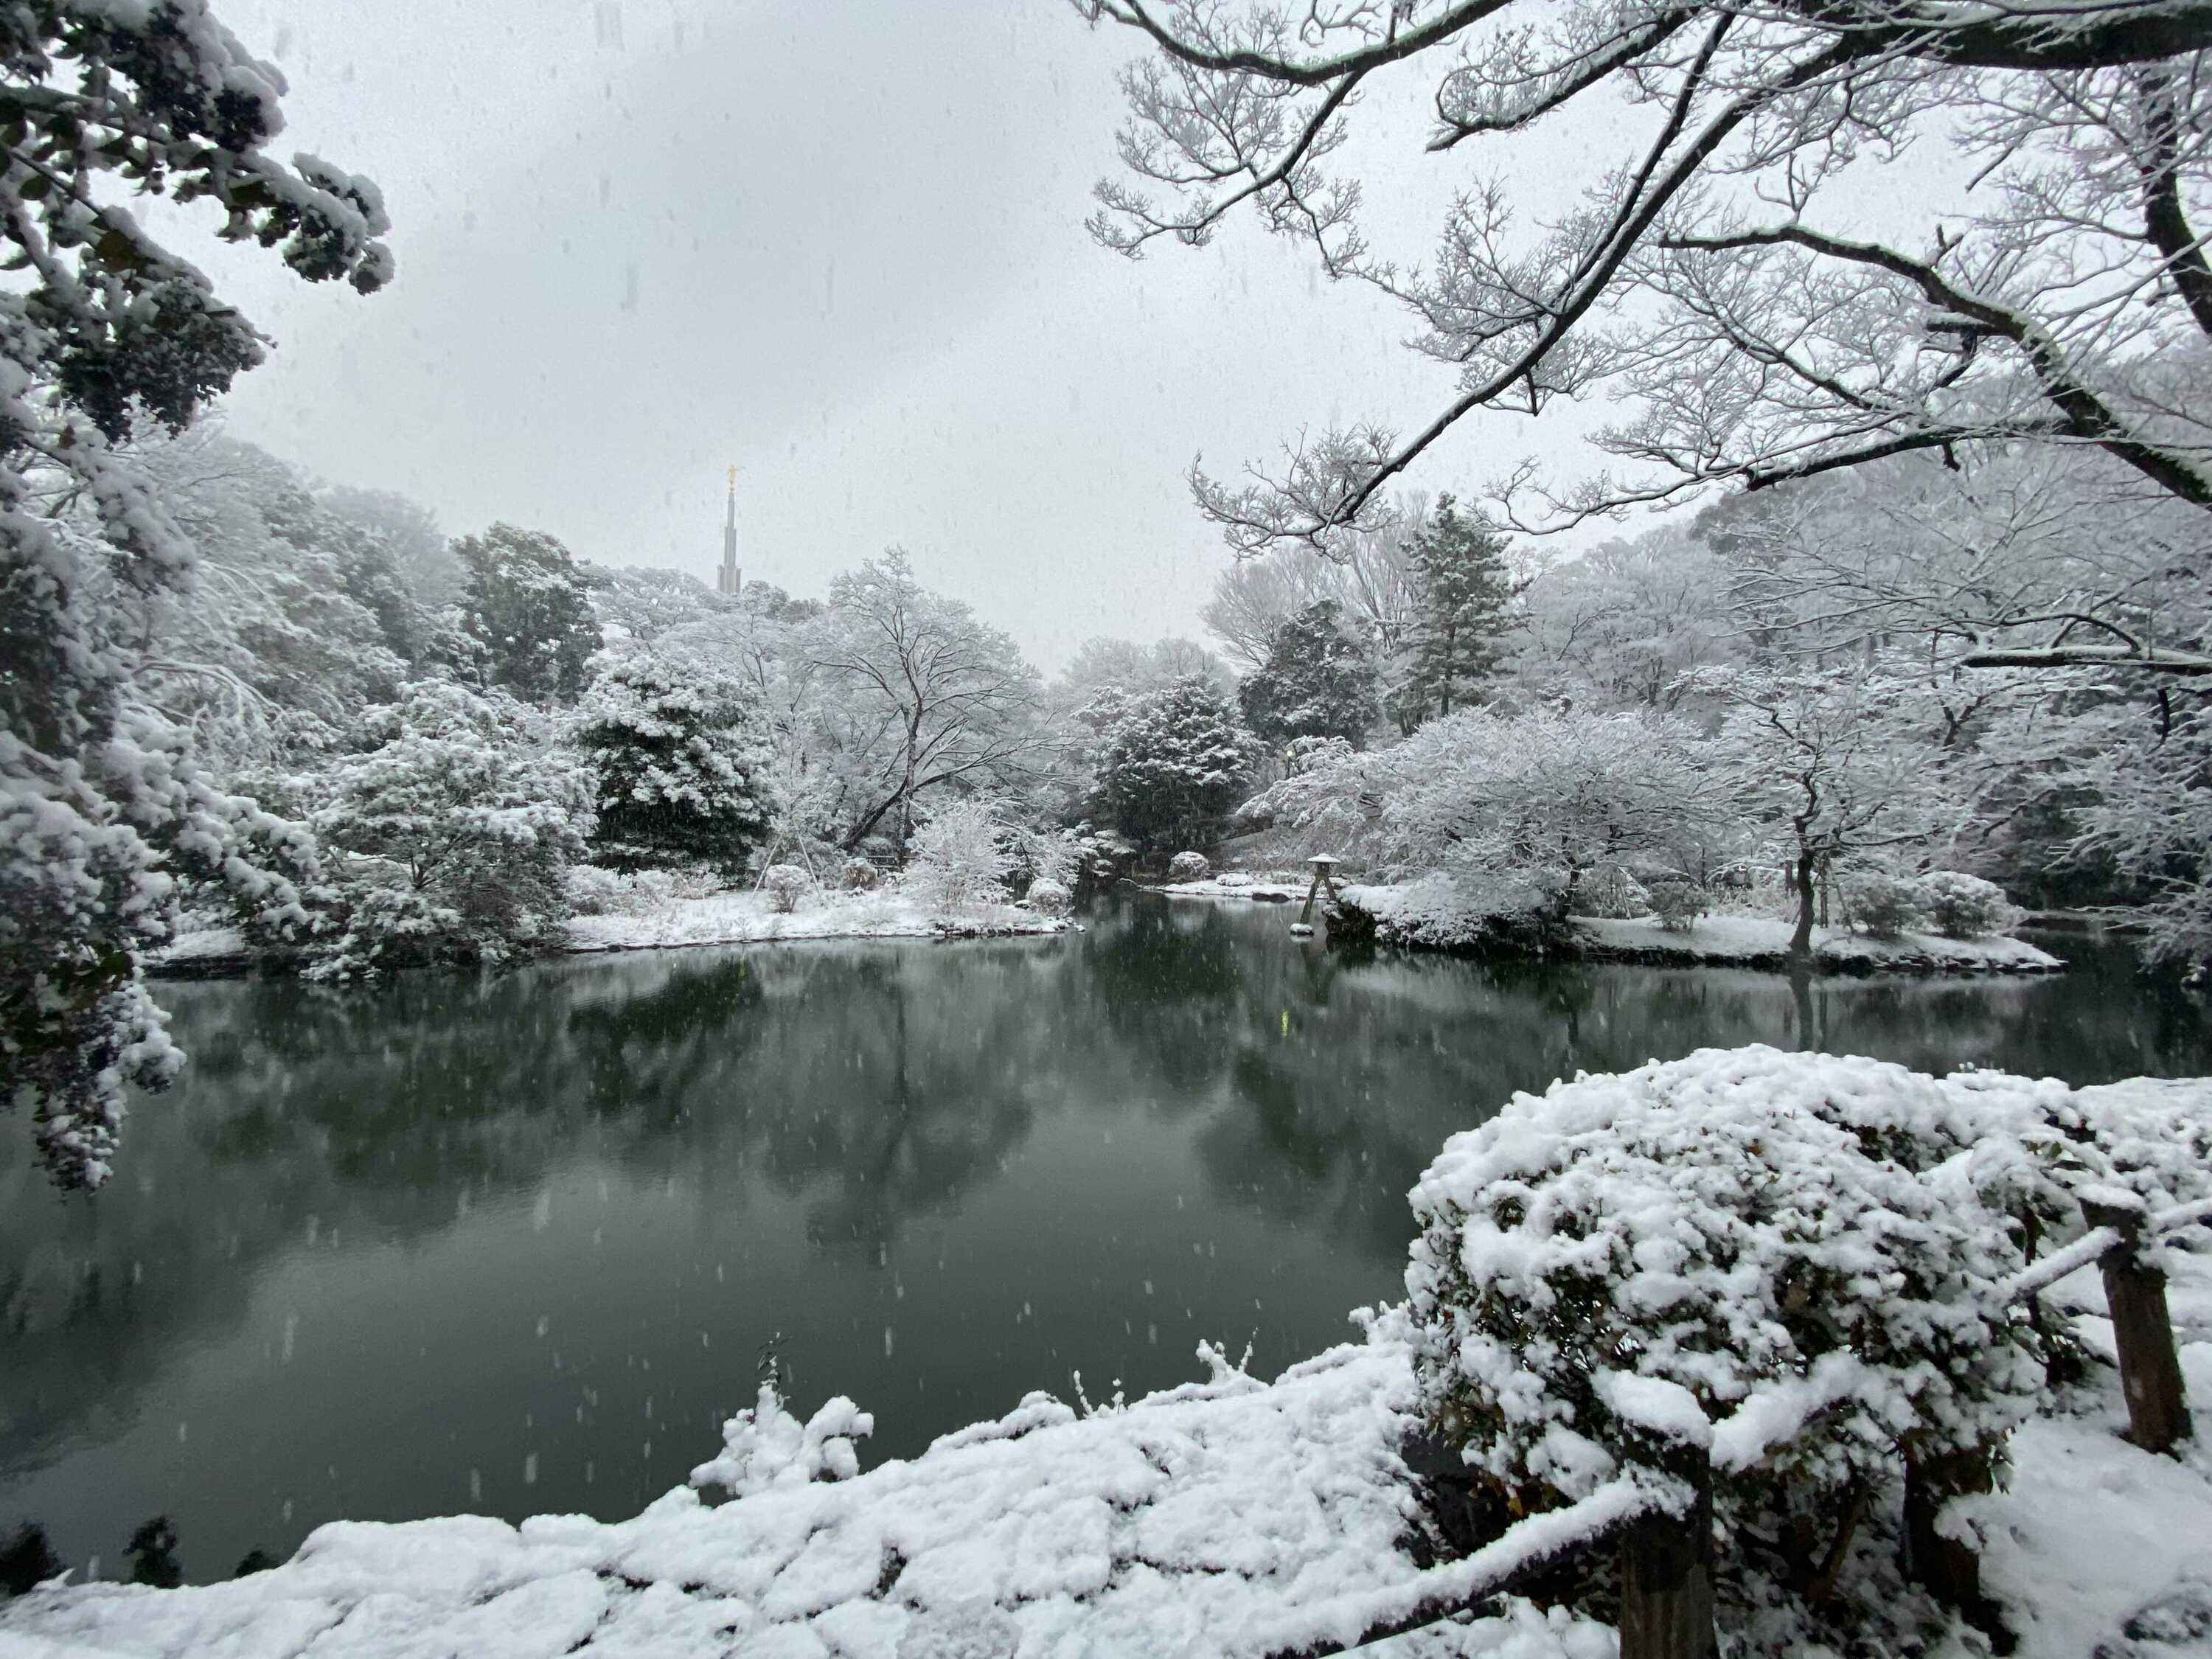 Tokyo weather: Snow storm SMASHES Tokyo for first time in 4 years